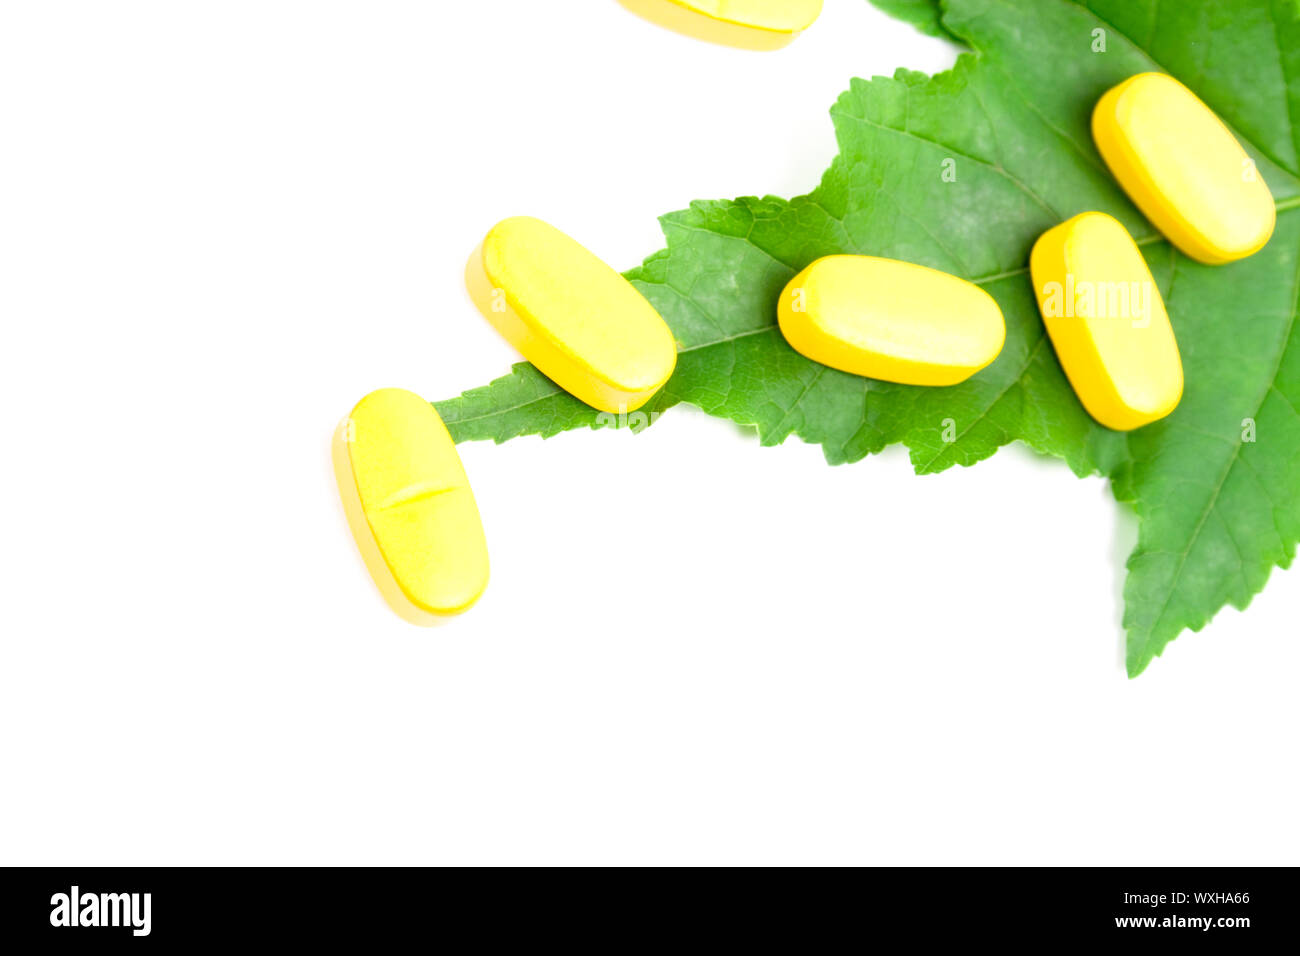 yellow vitamin pills over green leaf on white background Stock Photo